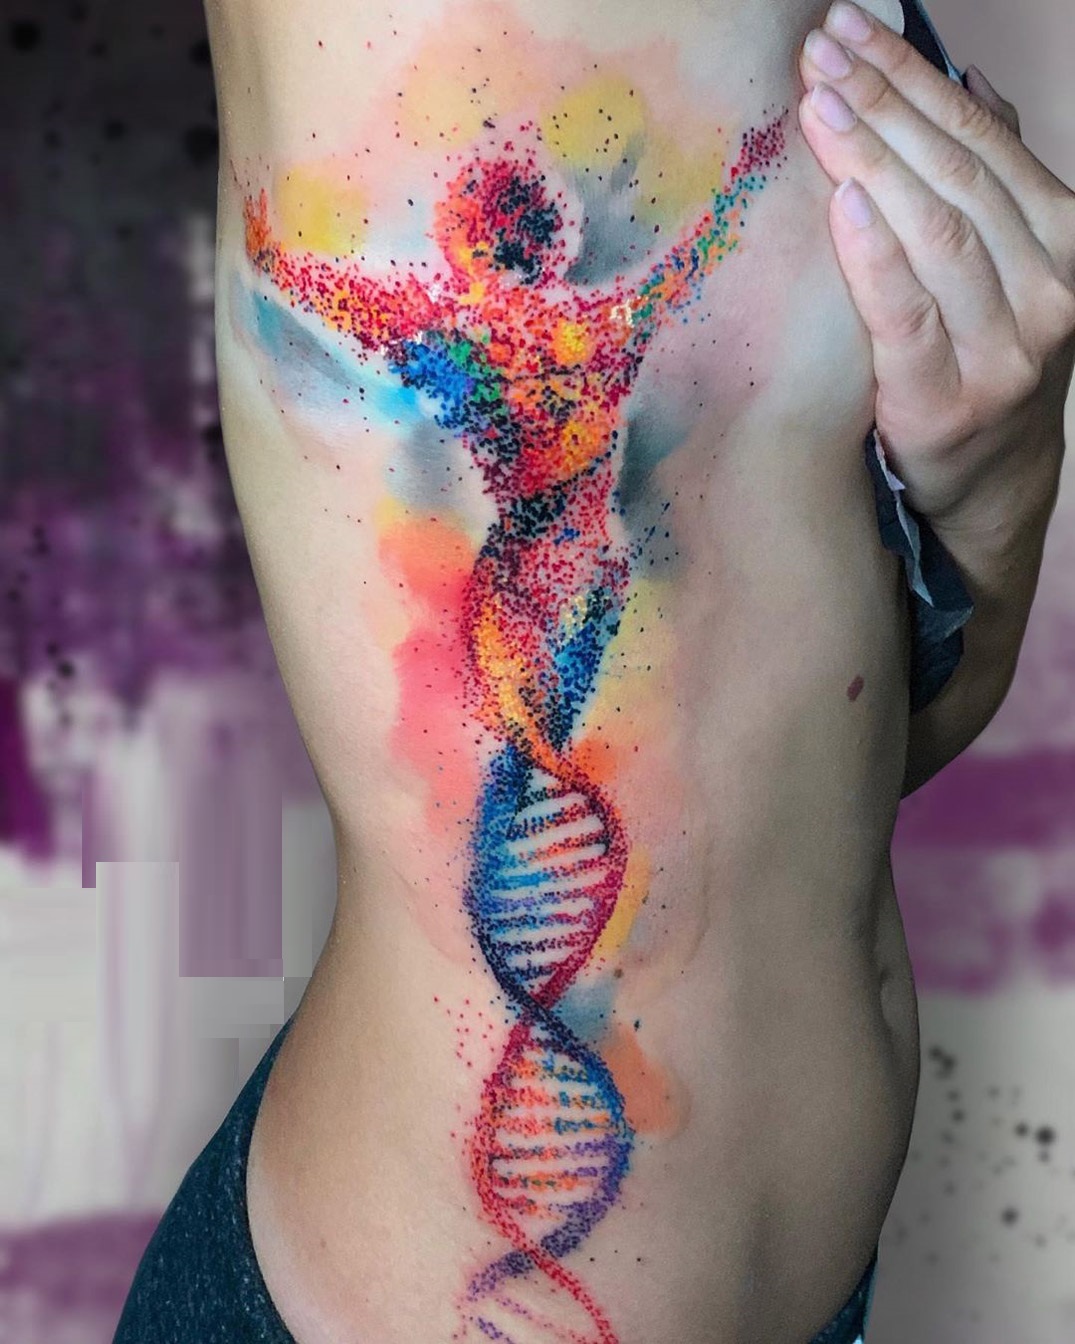 Details more than 157 dna tattoo sleeve